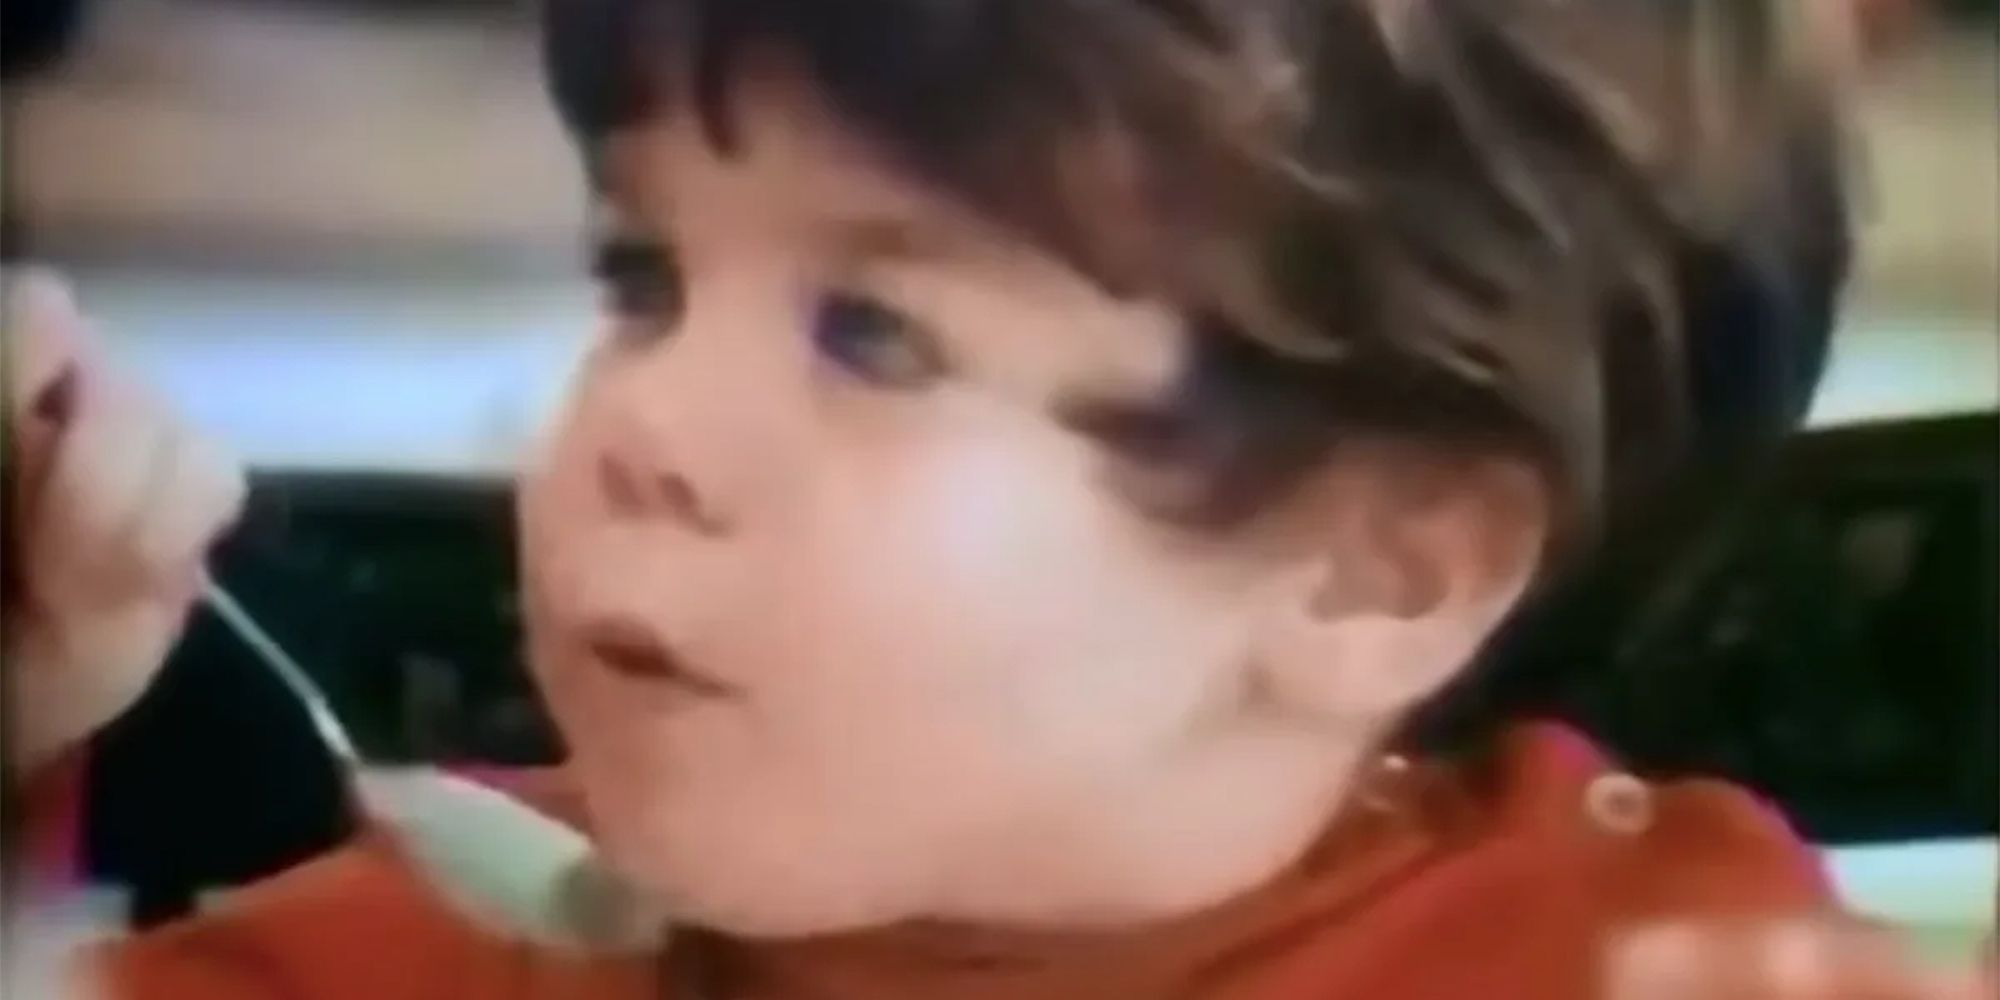 Mikey, a young boy, enjoys a bowl of Life cereal.